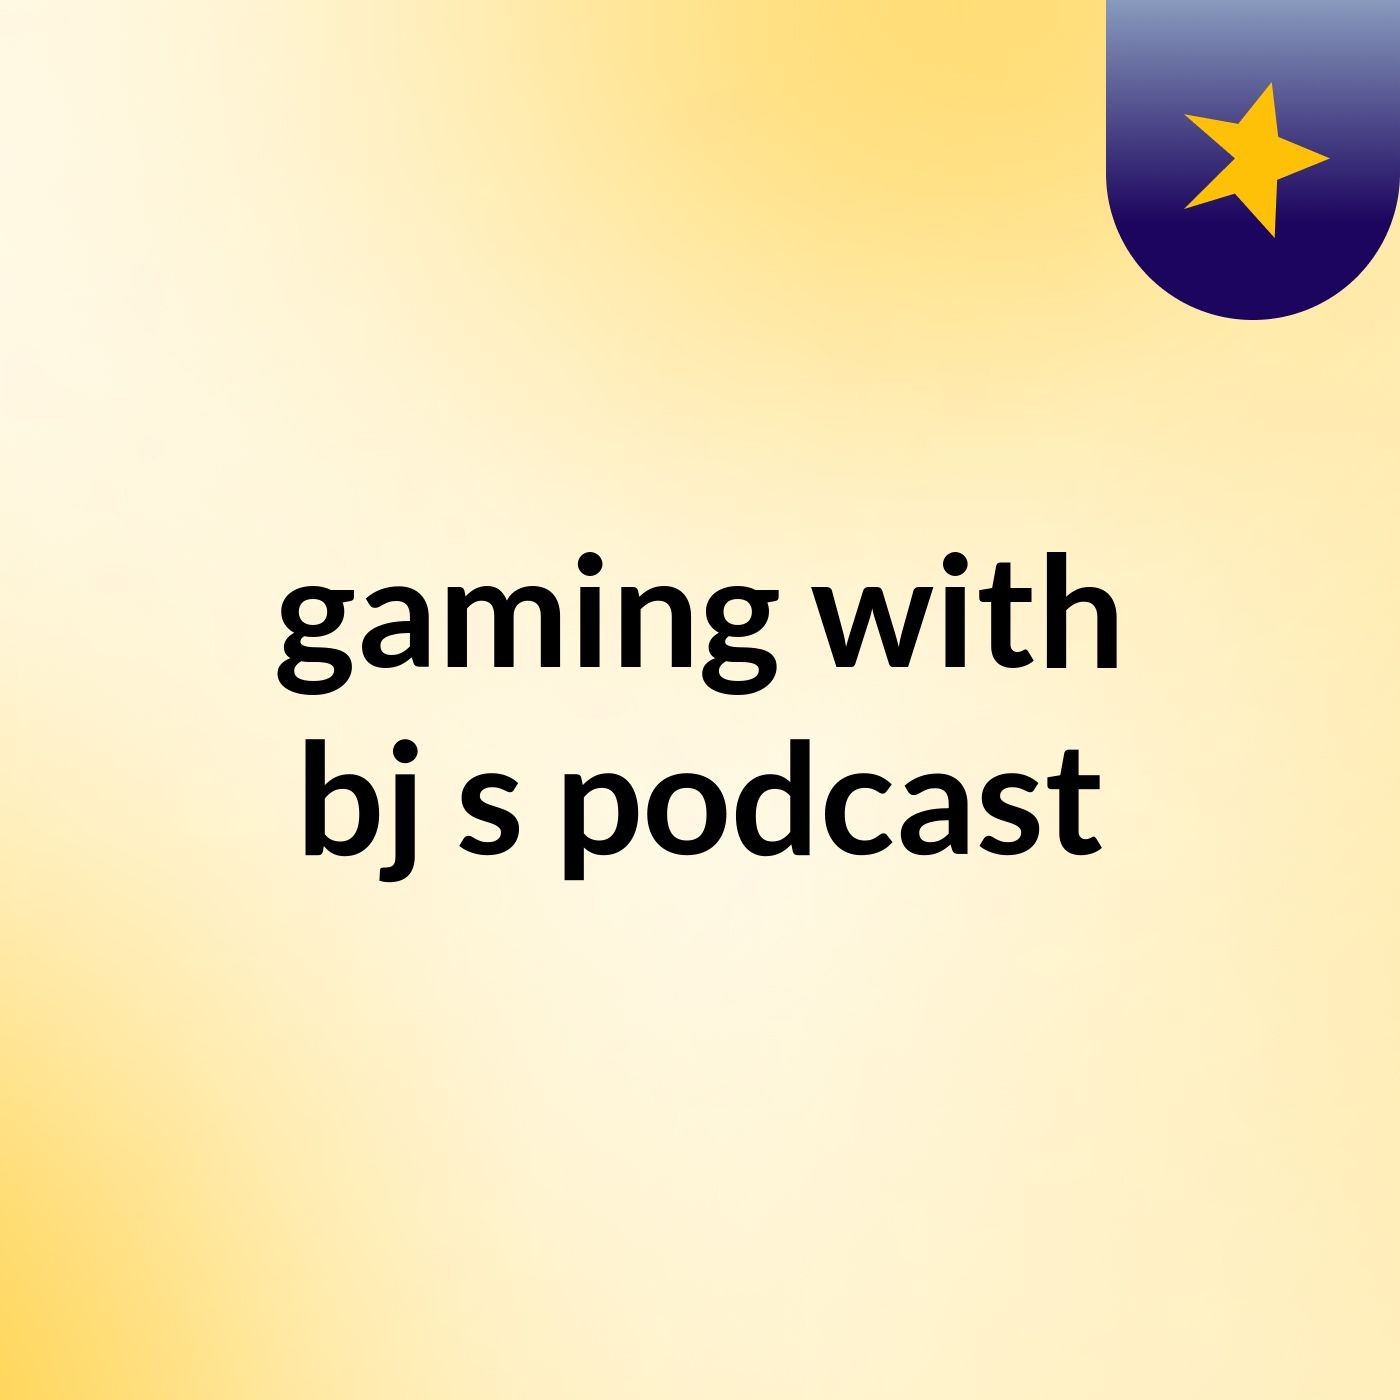 Episode 5 - gaming with bj's podcast